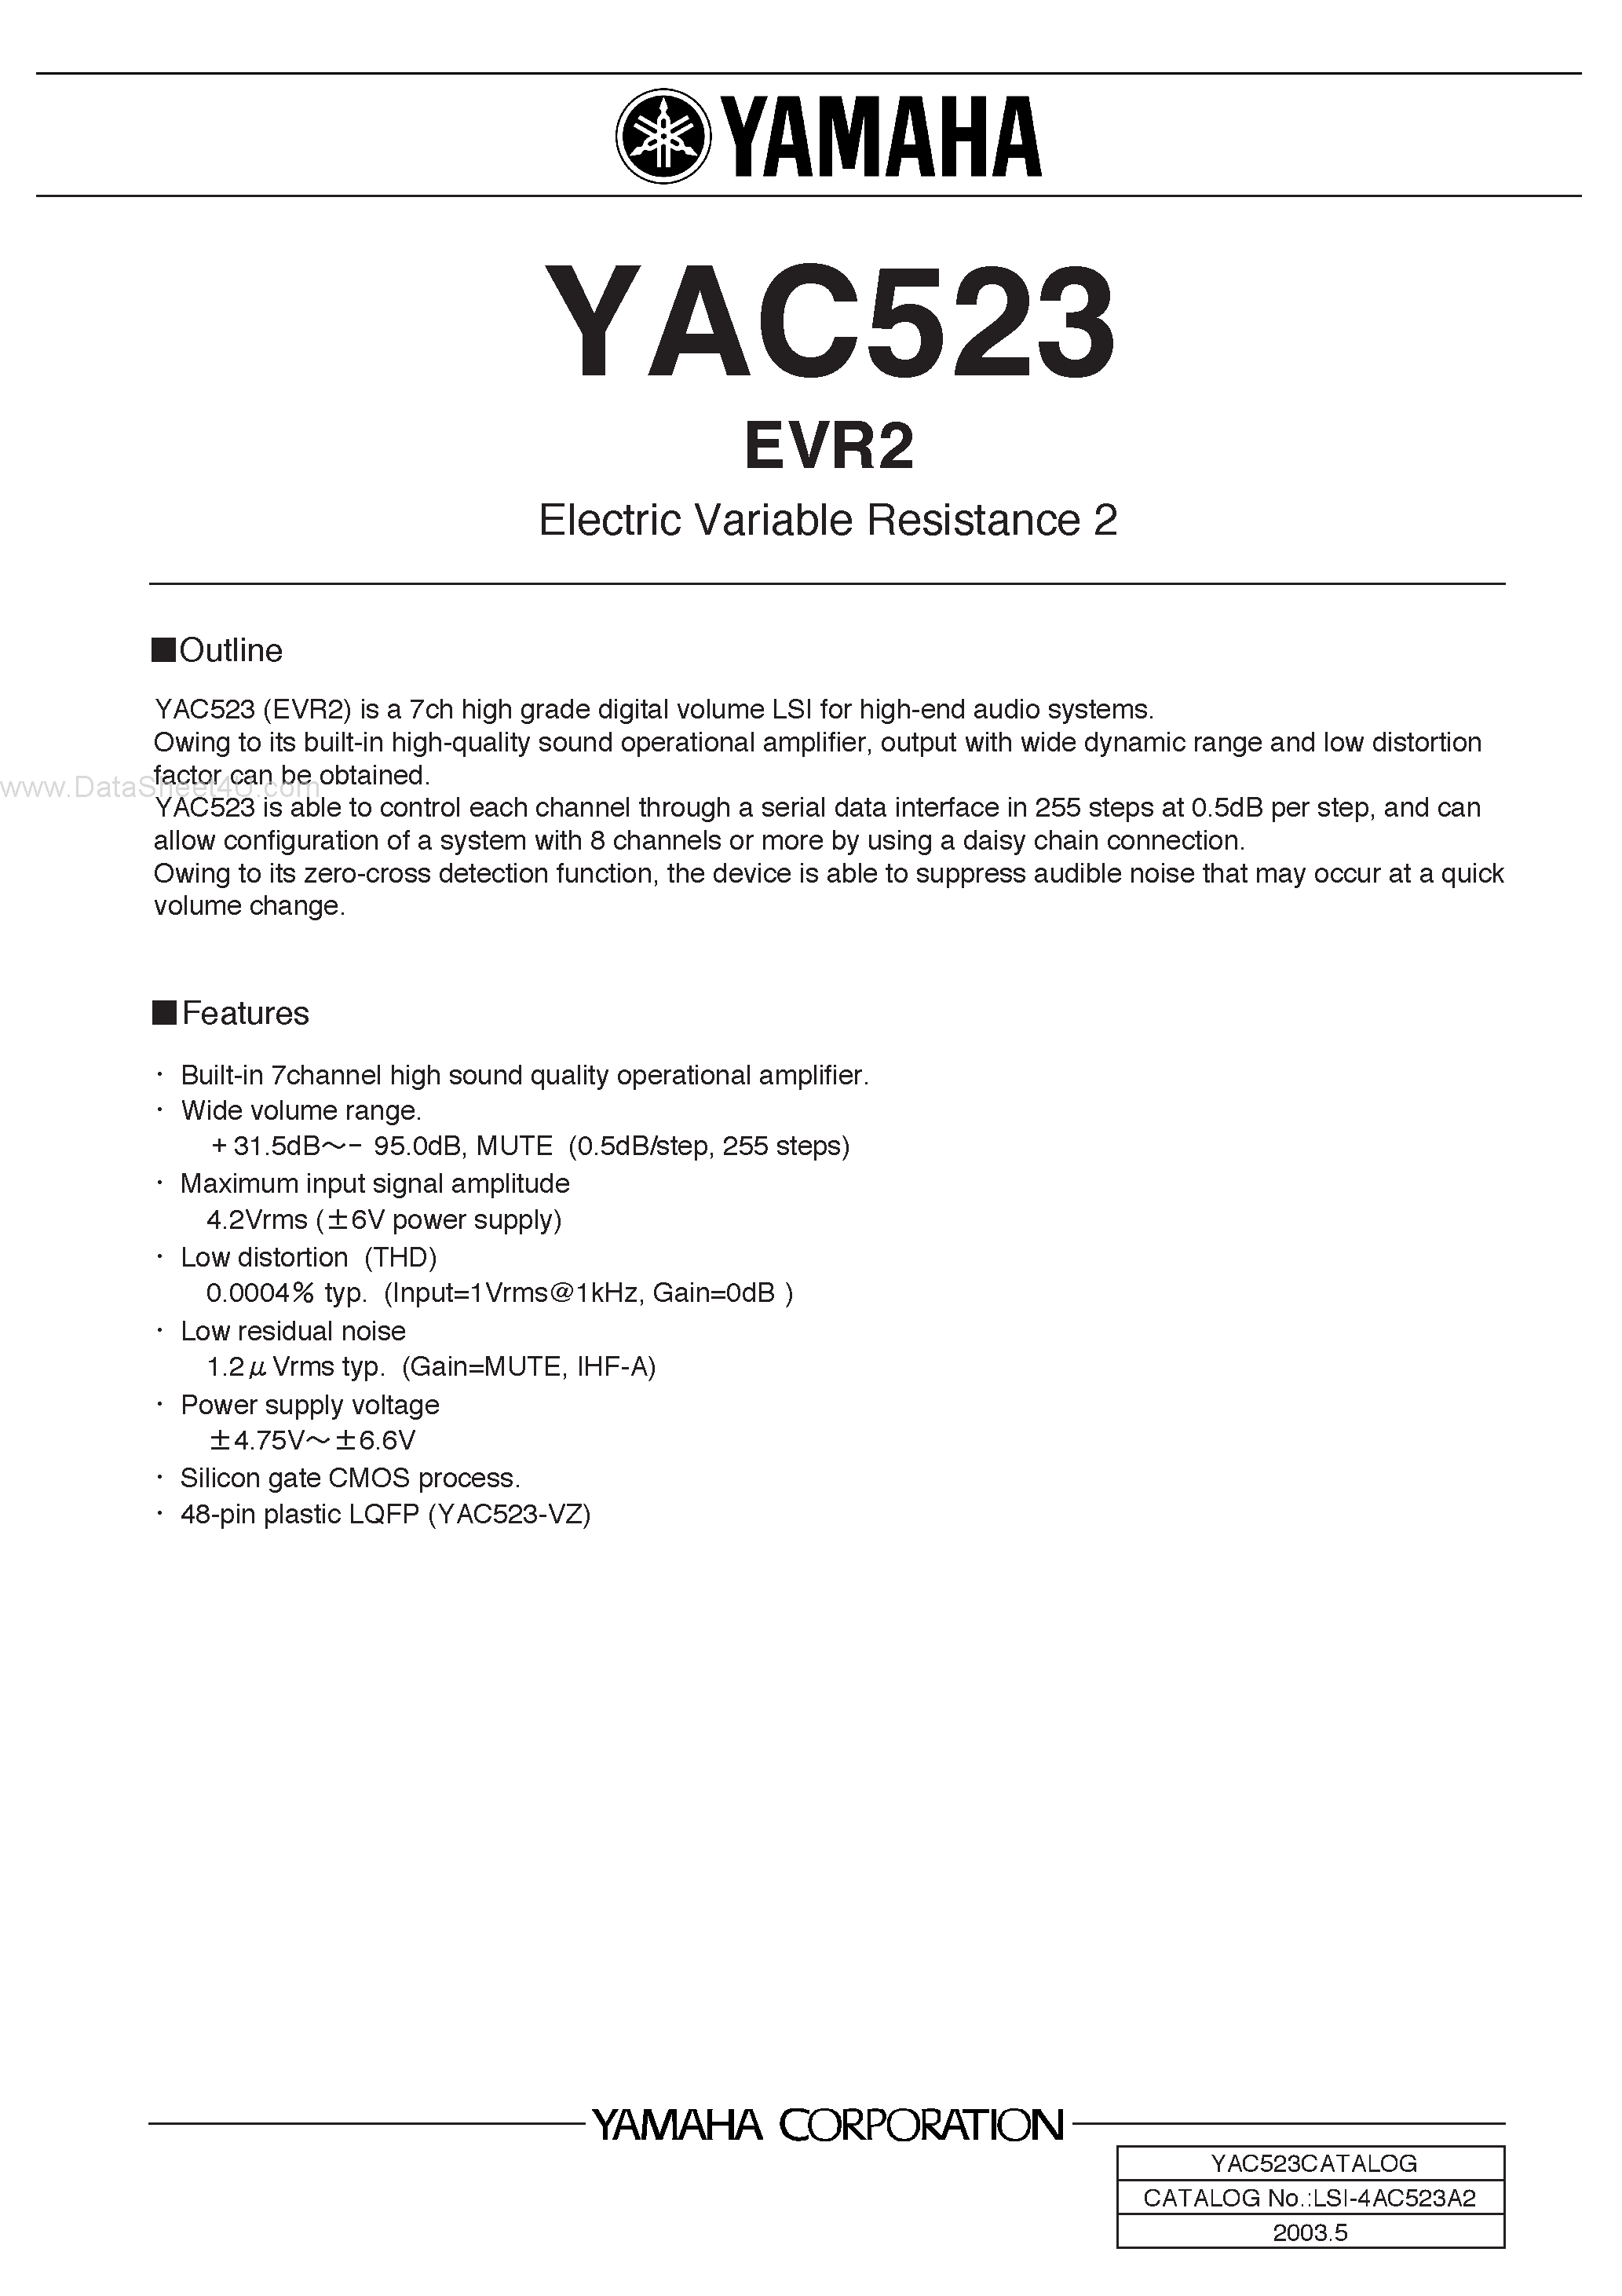 Datasheet YAC523 - Electric Variable Resistance 2 page 1